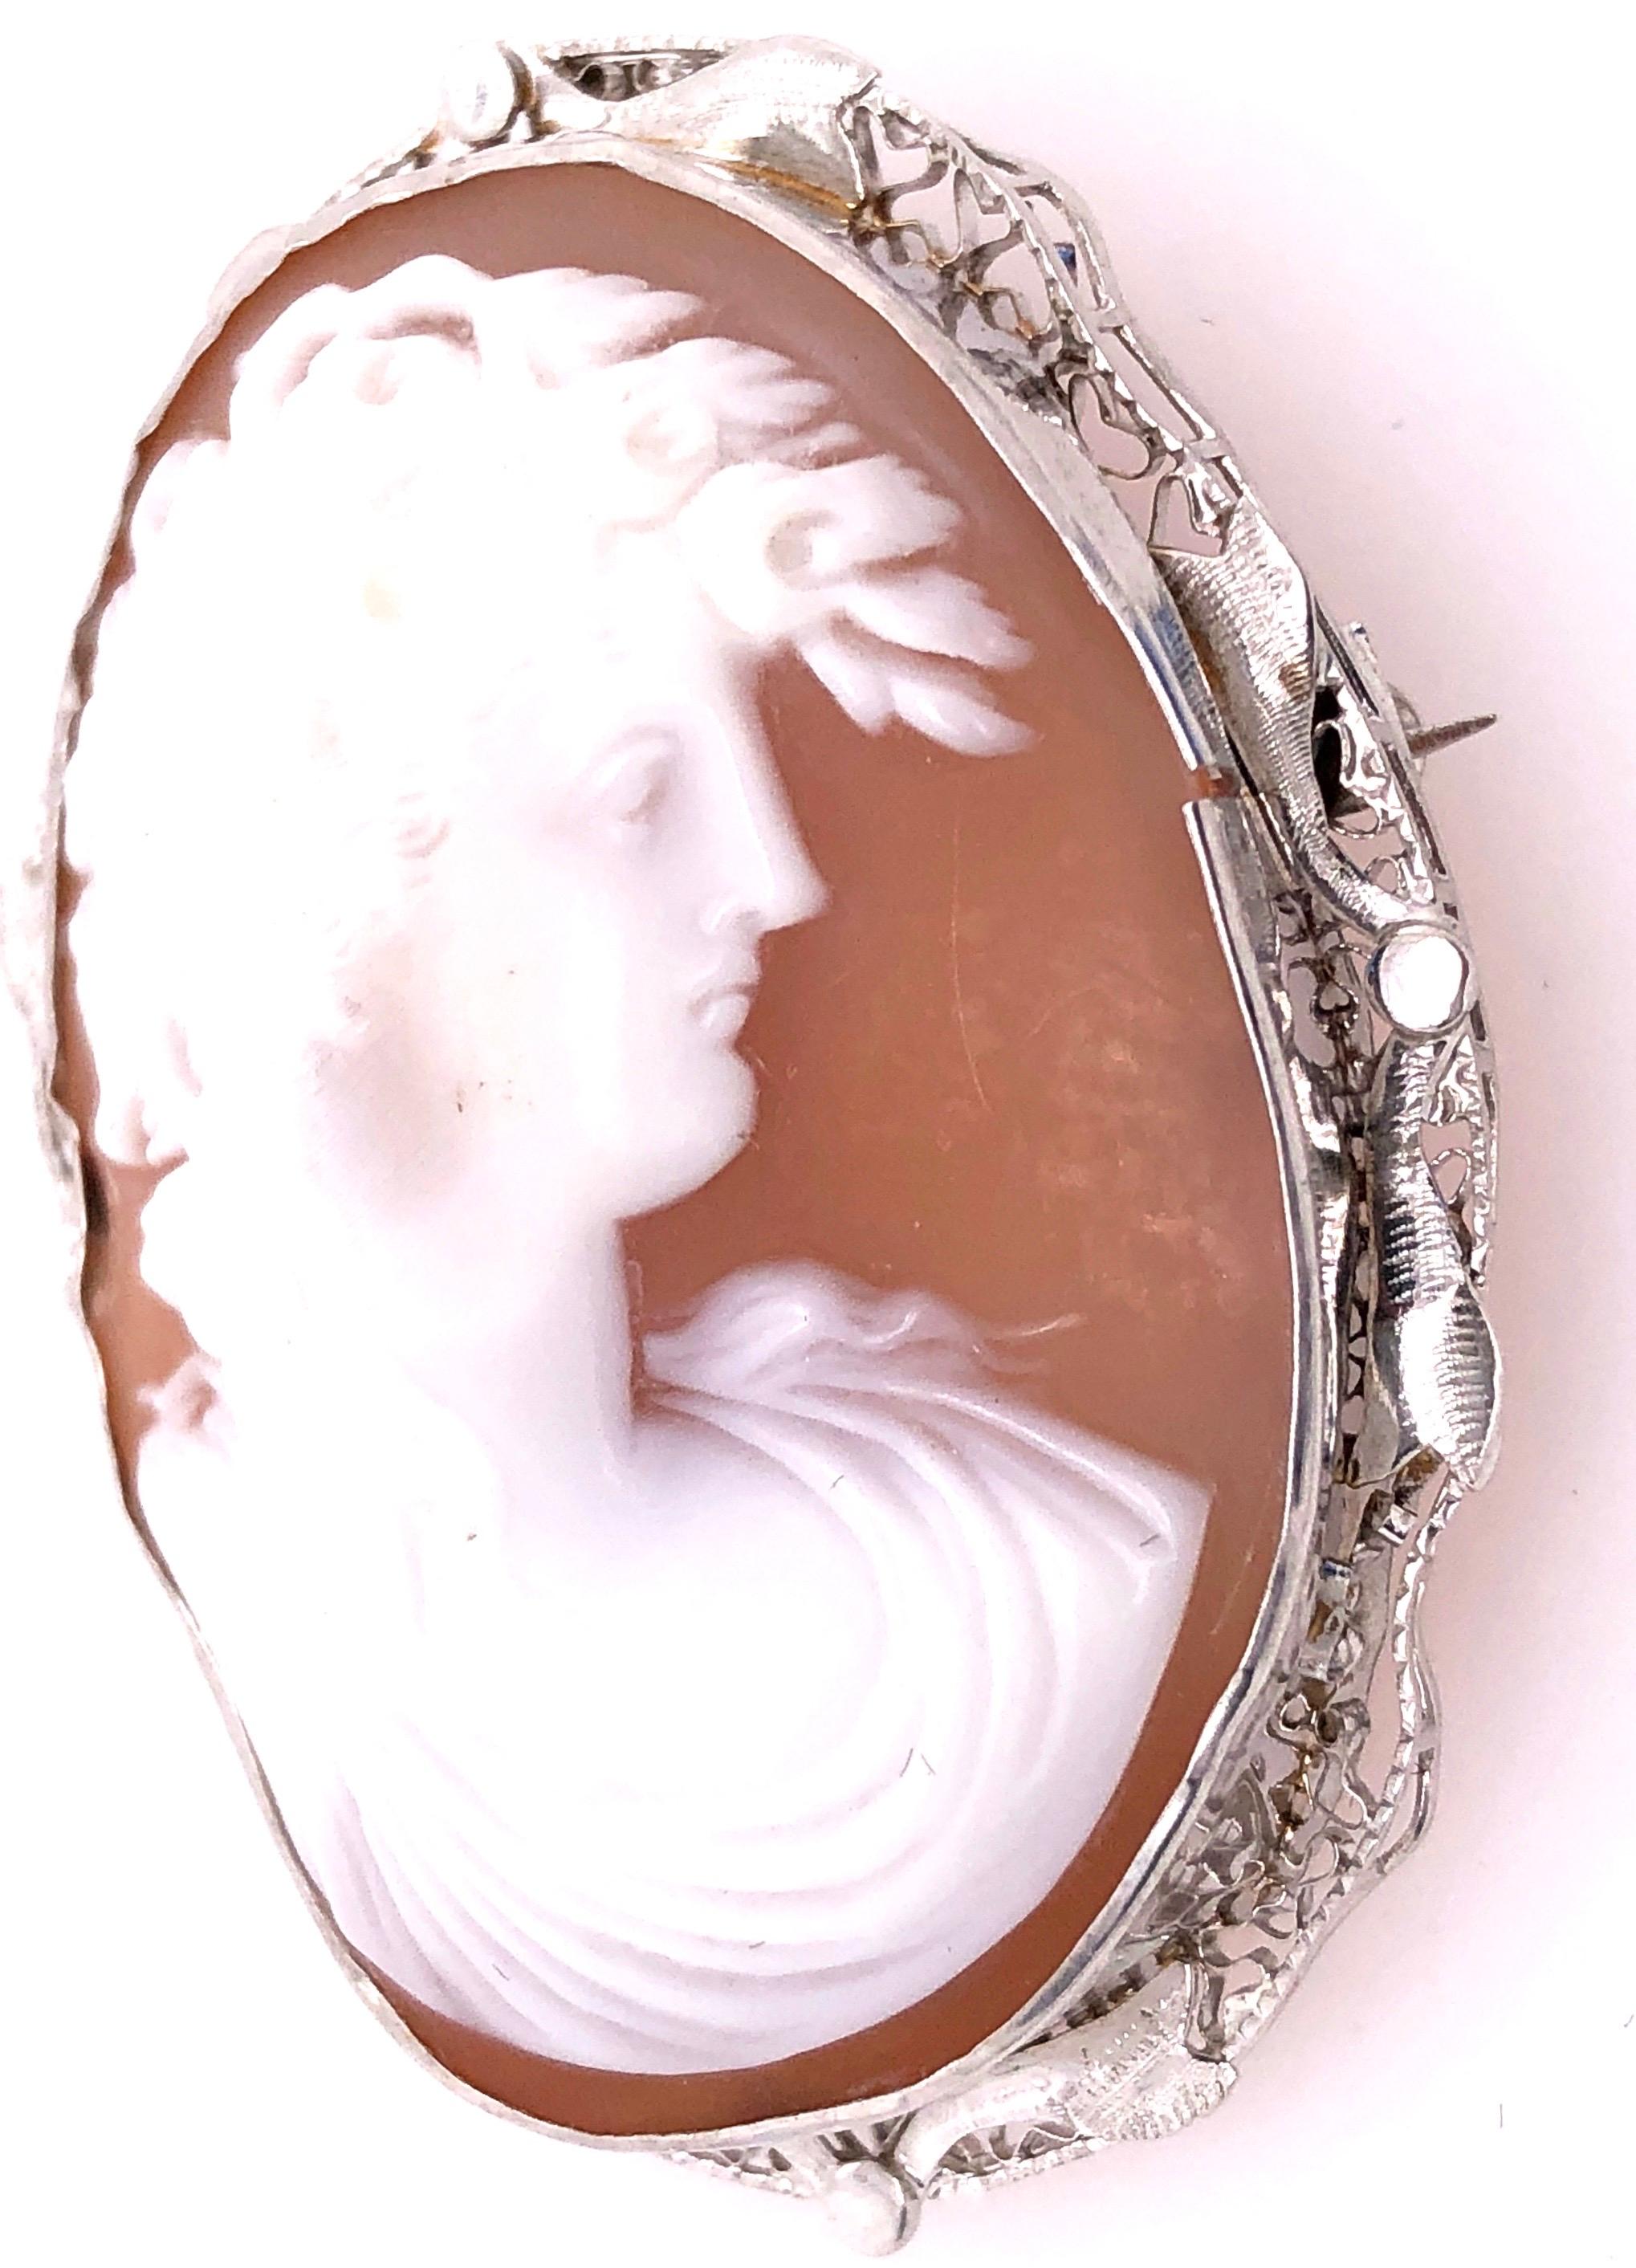 14 Karat White Gold Cameo Pendant/Brooch.
7.09 grams total weight
Height: 45 mm
Width: 30 mm